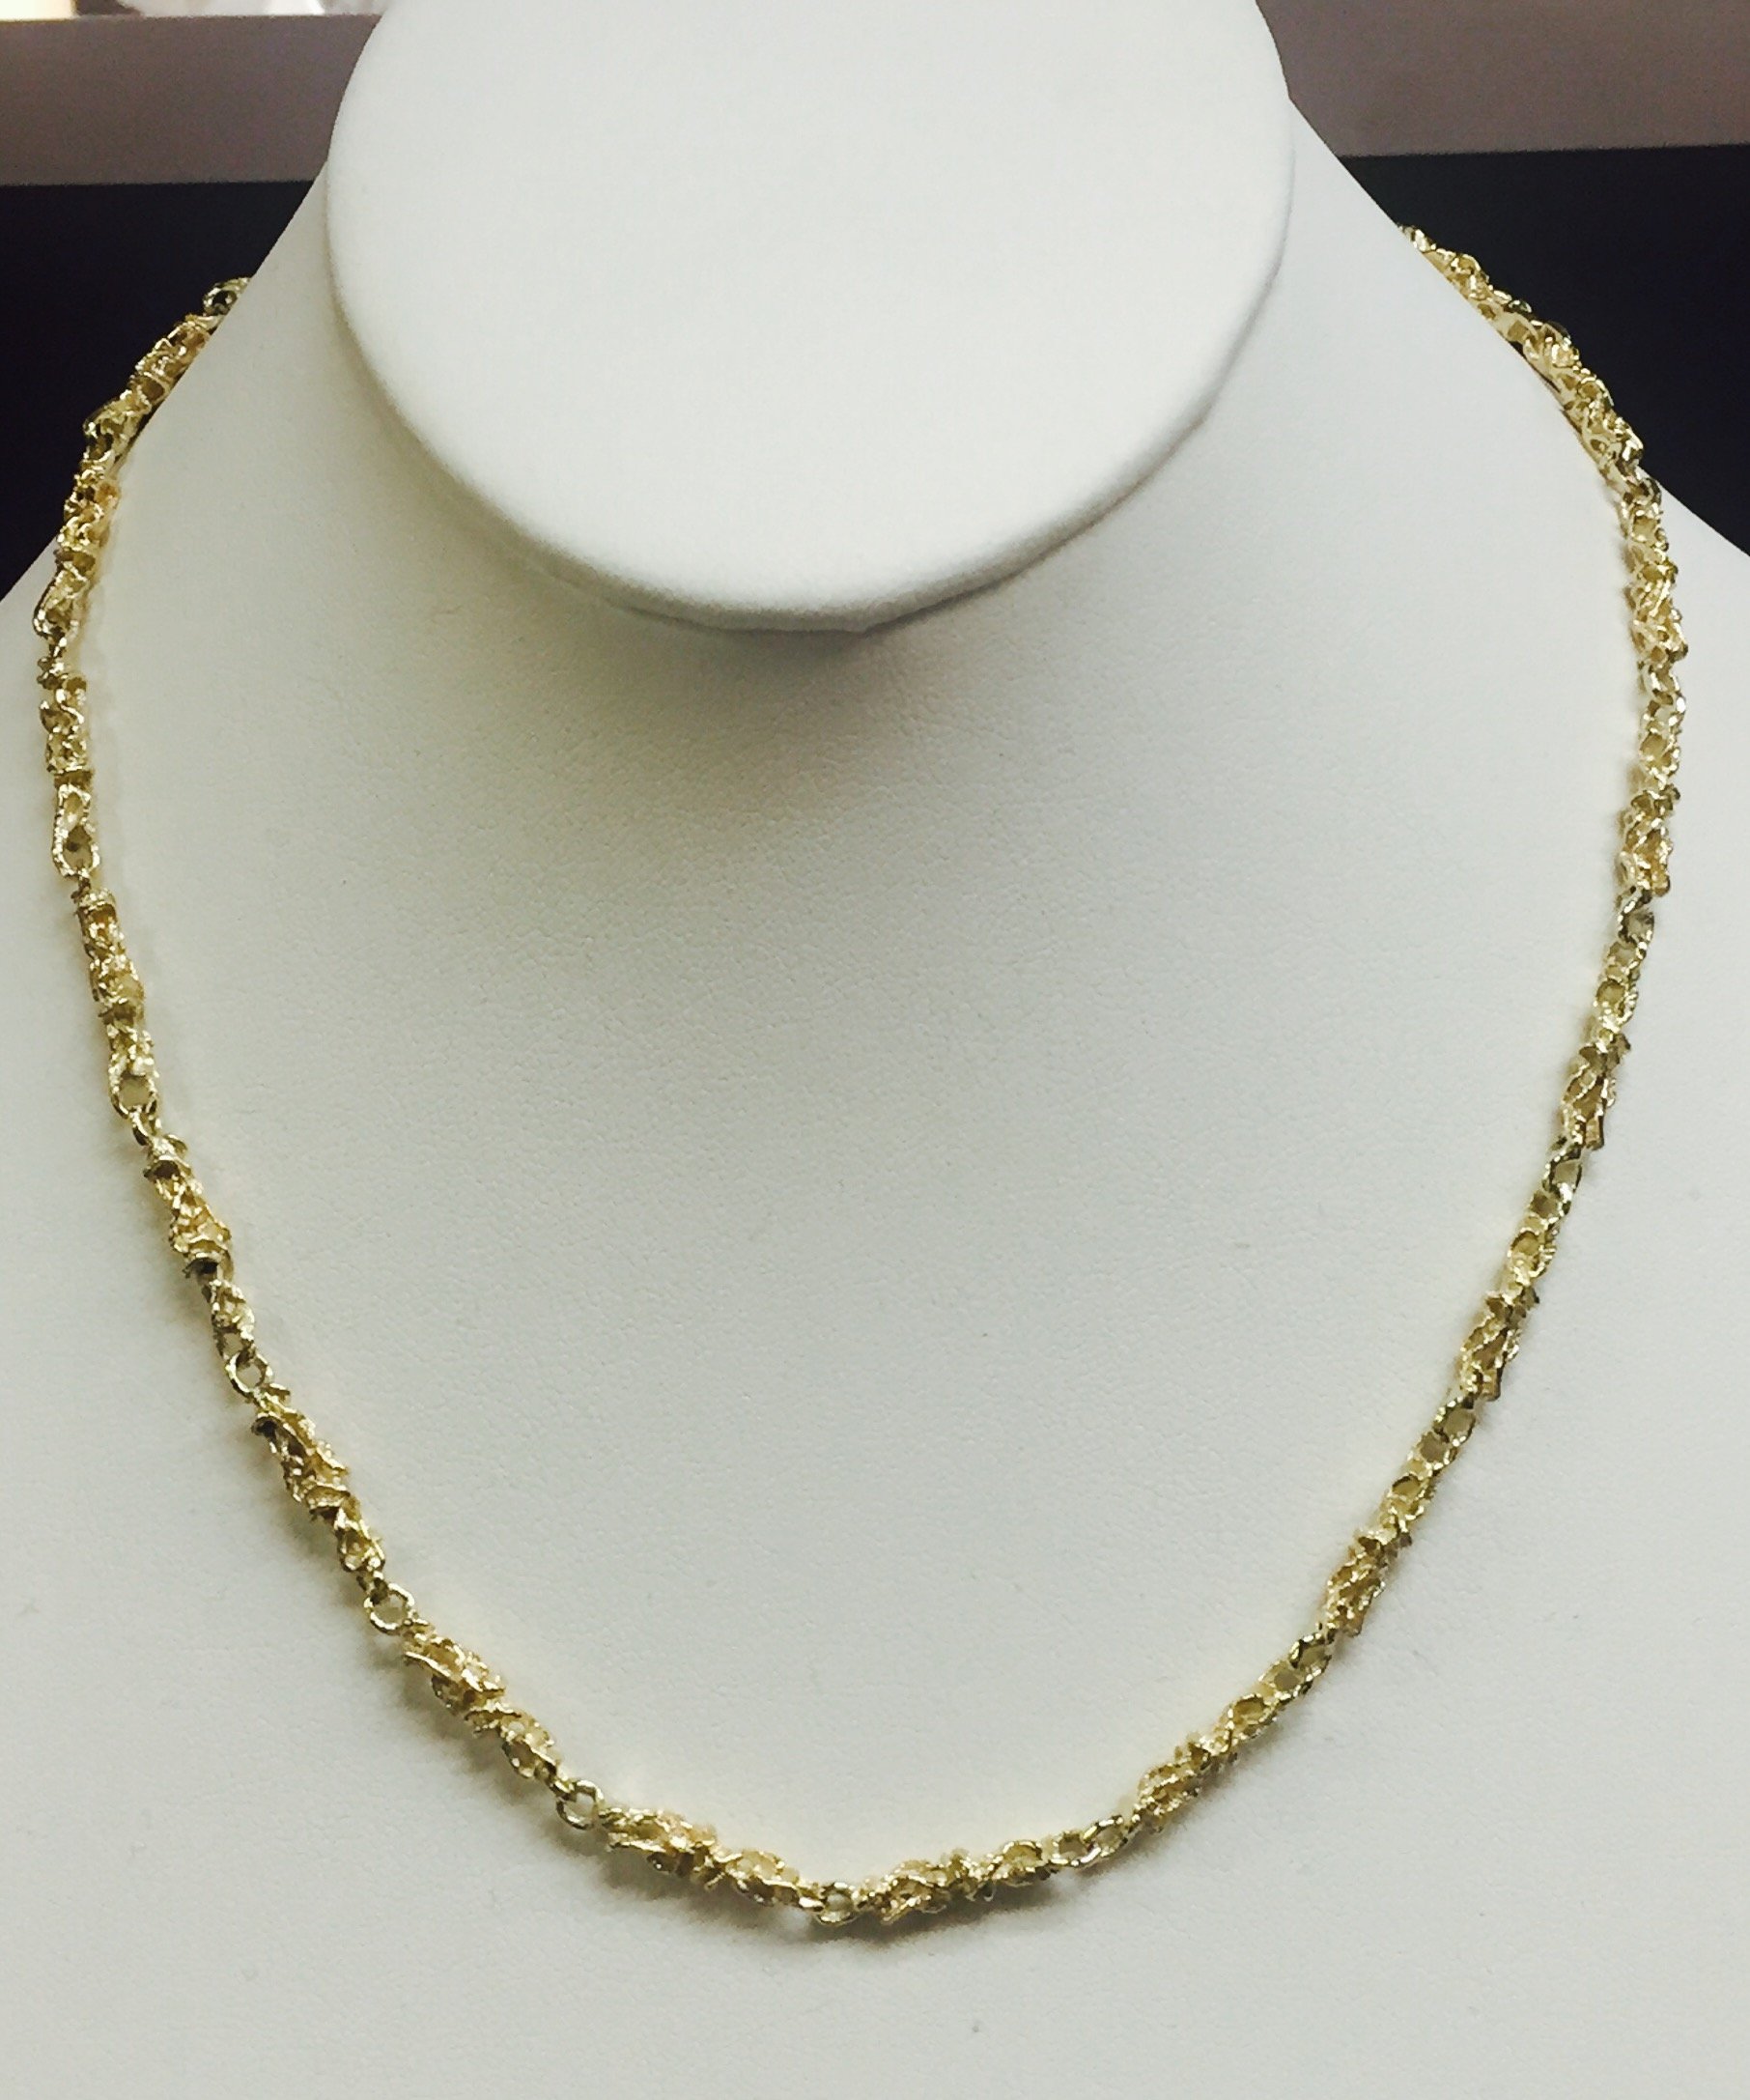 TEX 14kt Solid Yellow Gold Handmade Nugget link chain/necklace 30